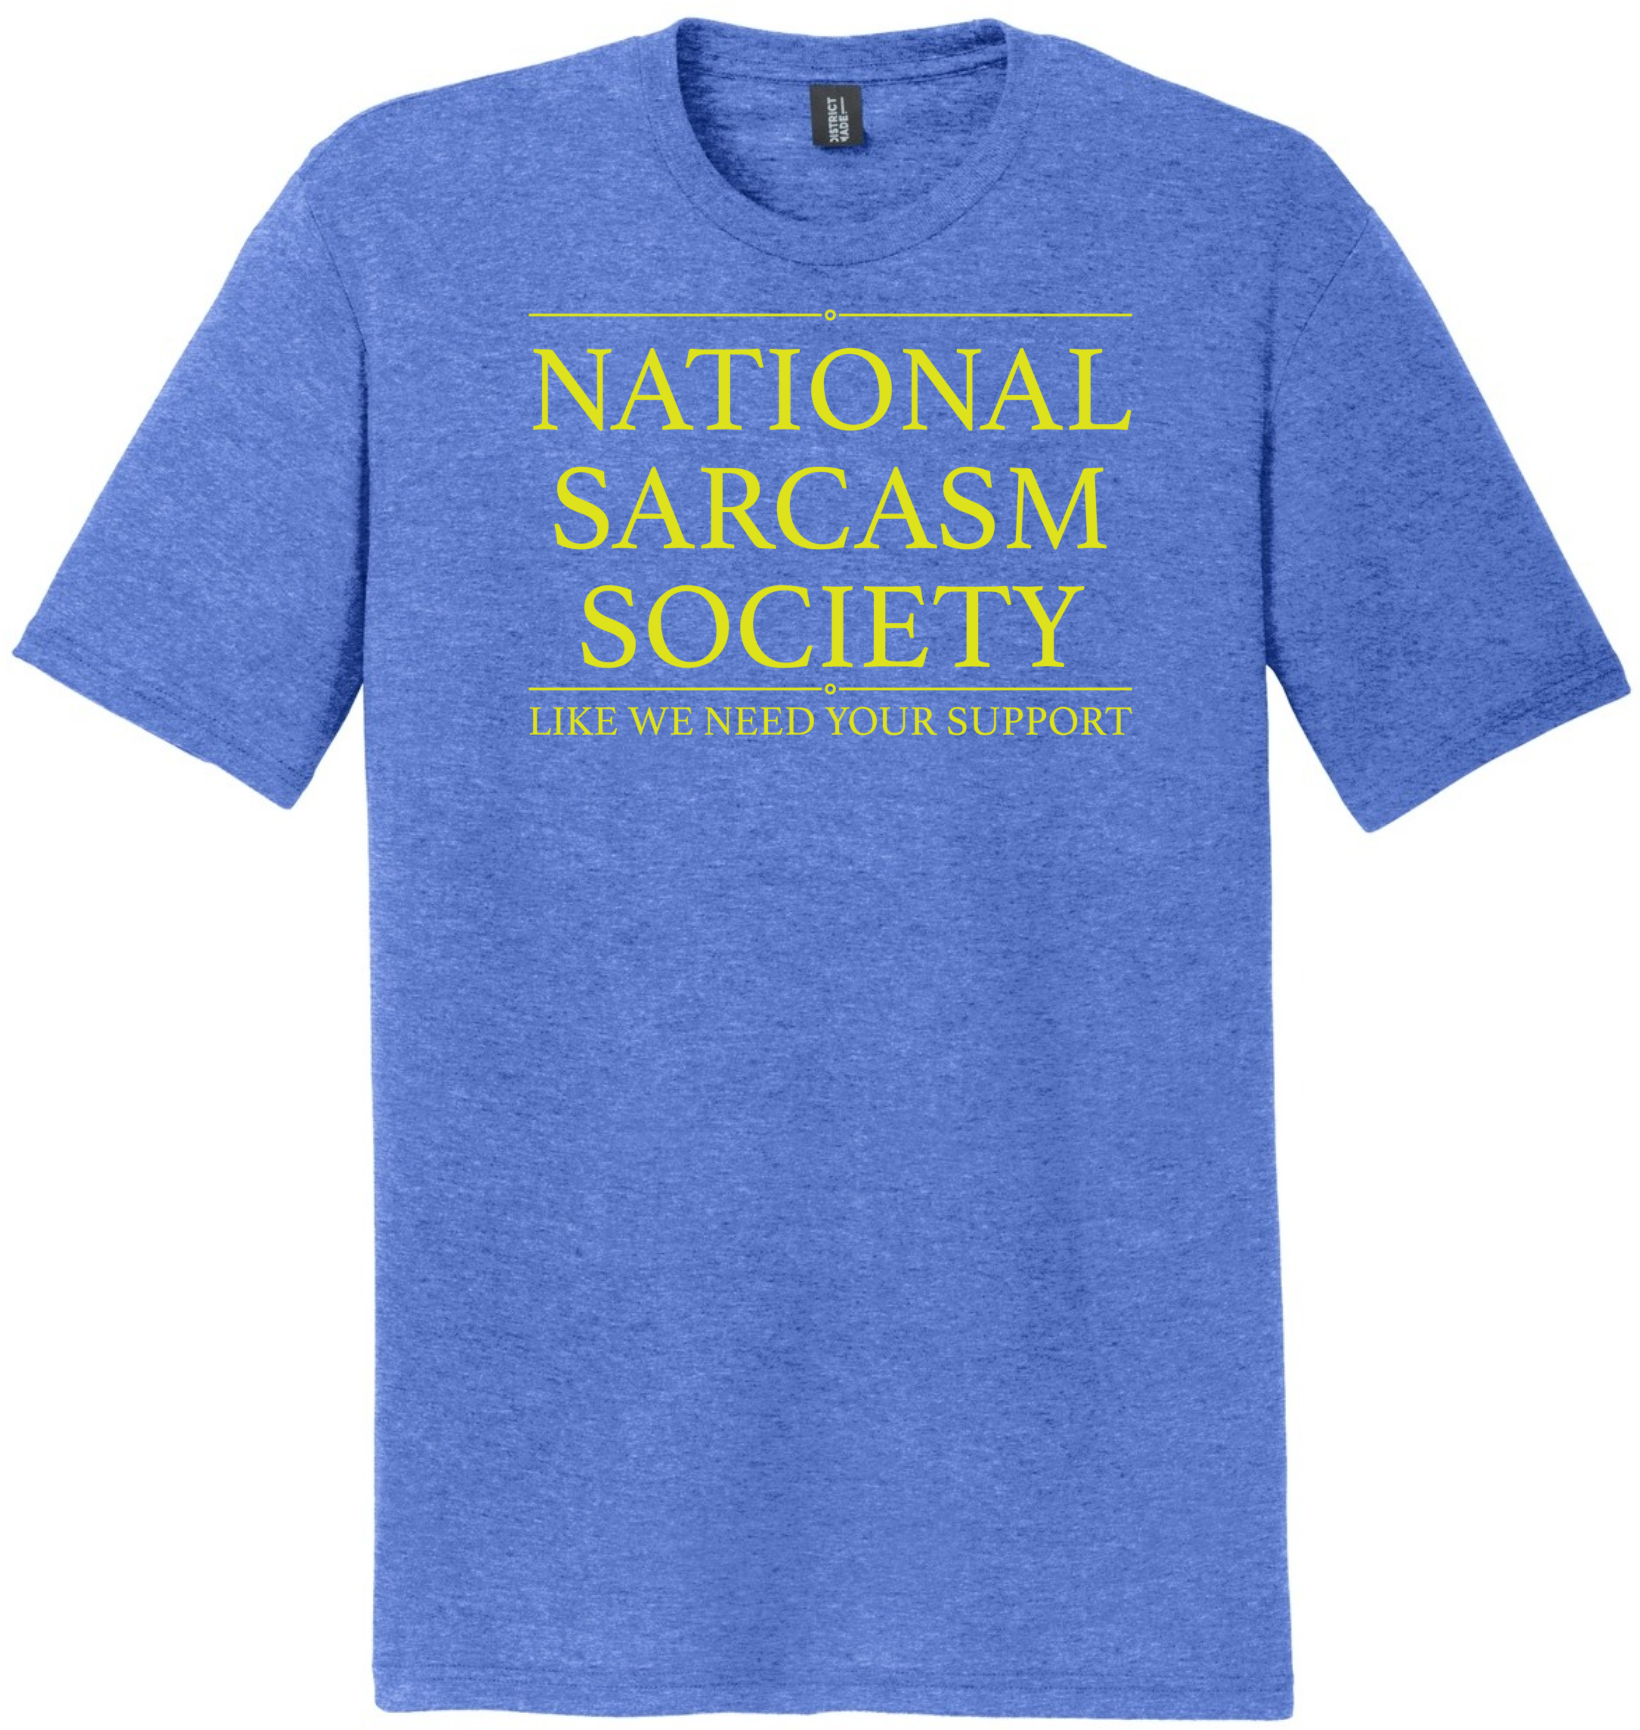 National Sarcasm Society...Life we need your support